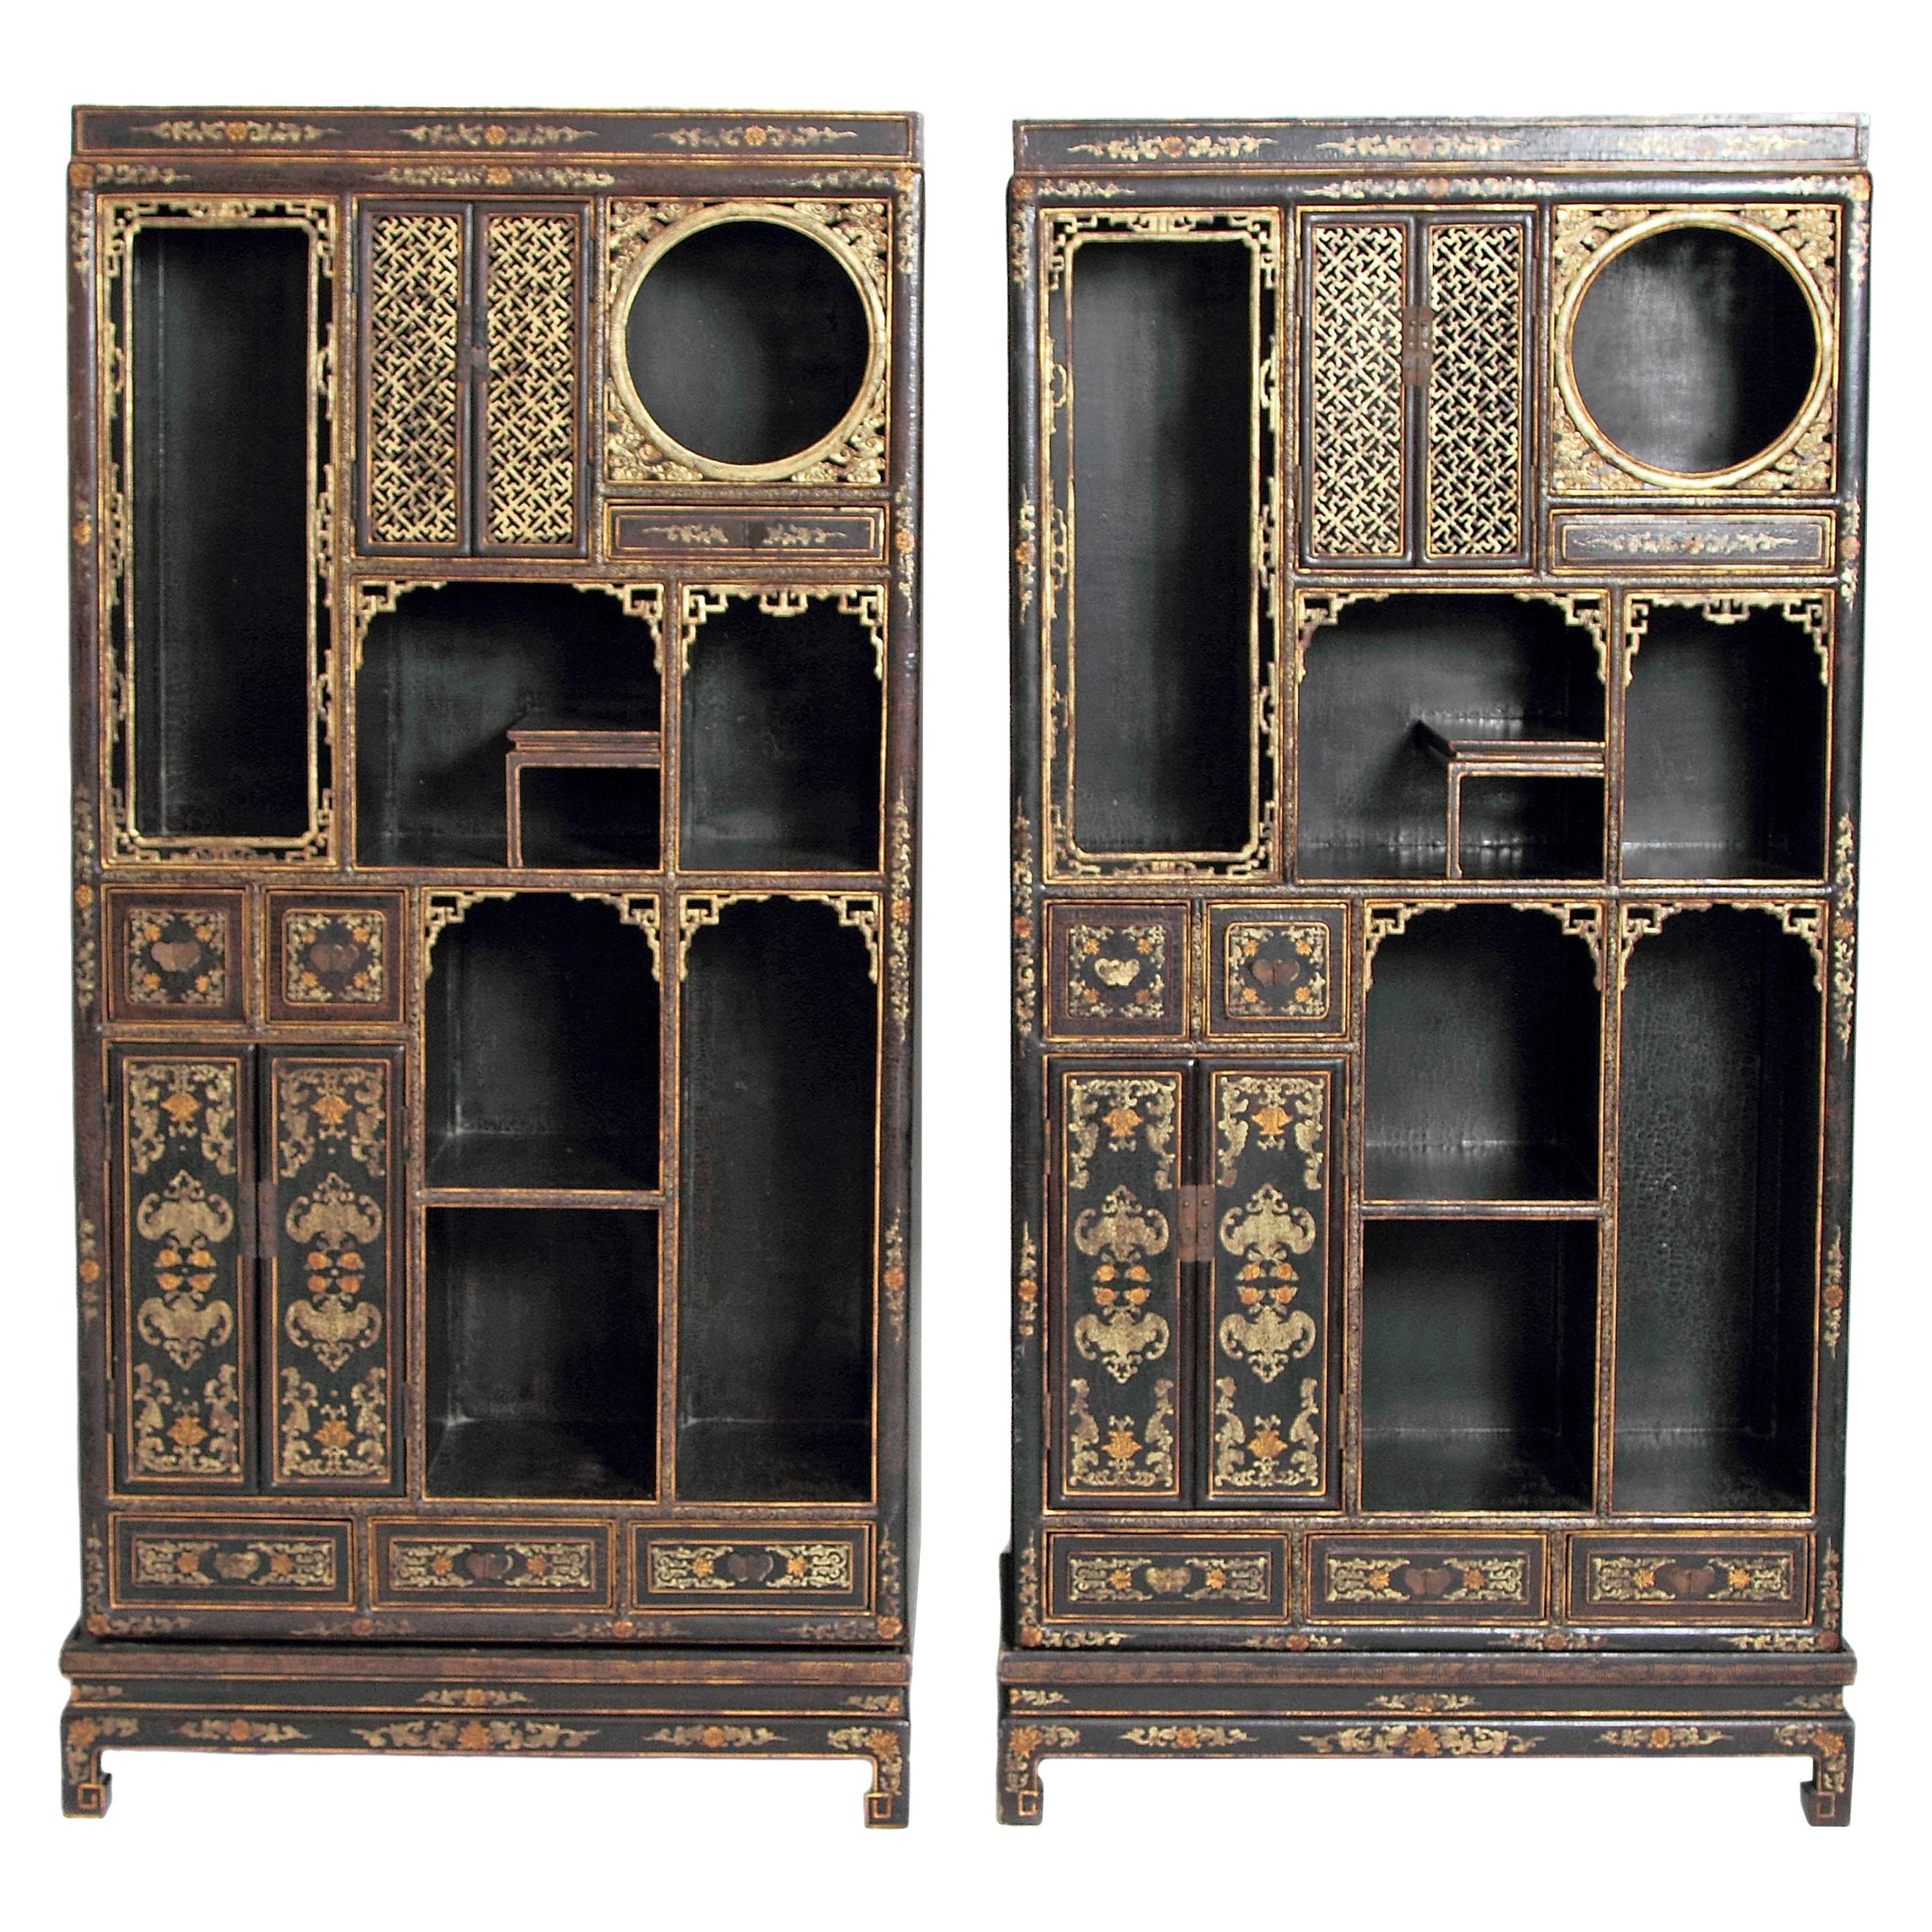 Pair of Chinese Black Lacquer Display Cabinets